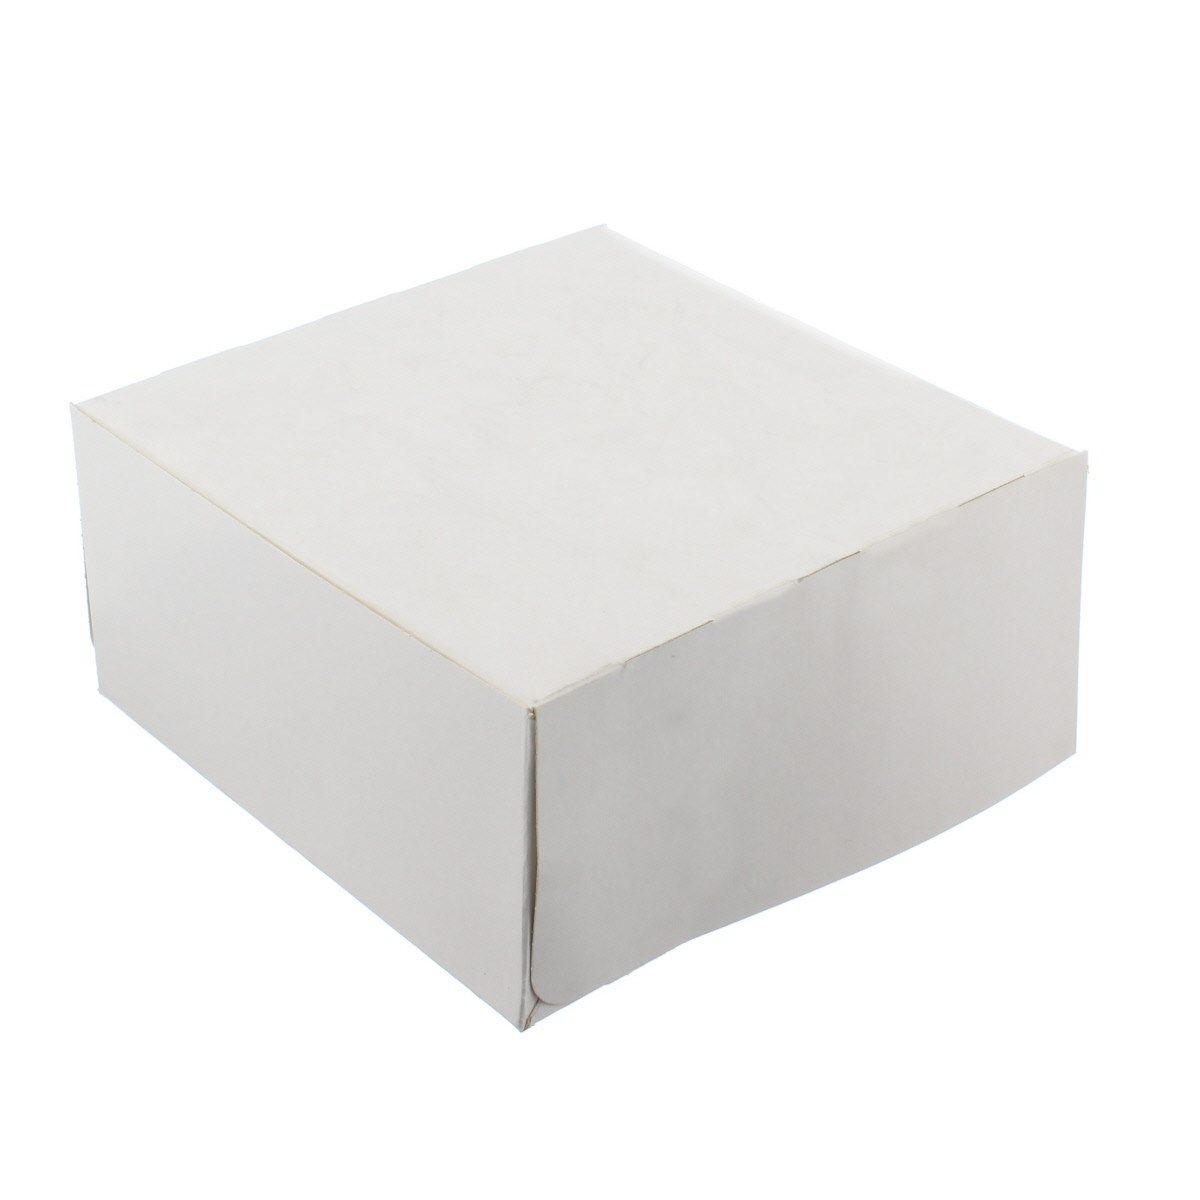 White Cake Boxes 8 X 8 X 4 Inch 250GSM 410 Micron - Pack of 250